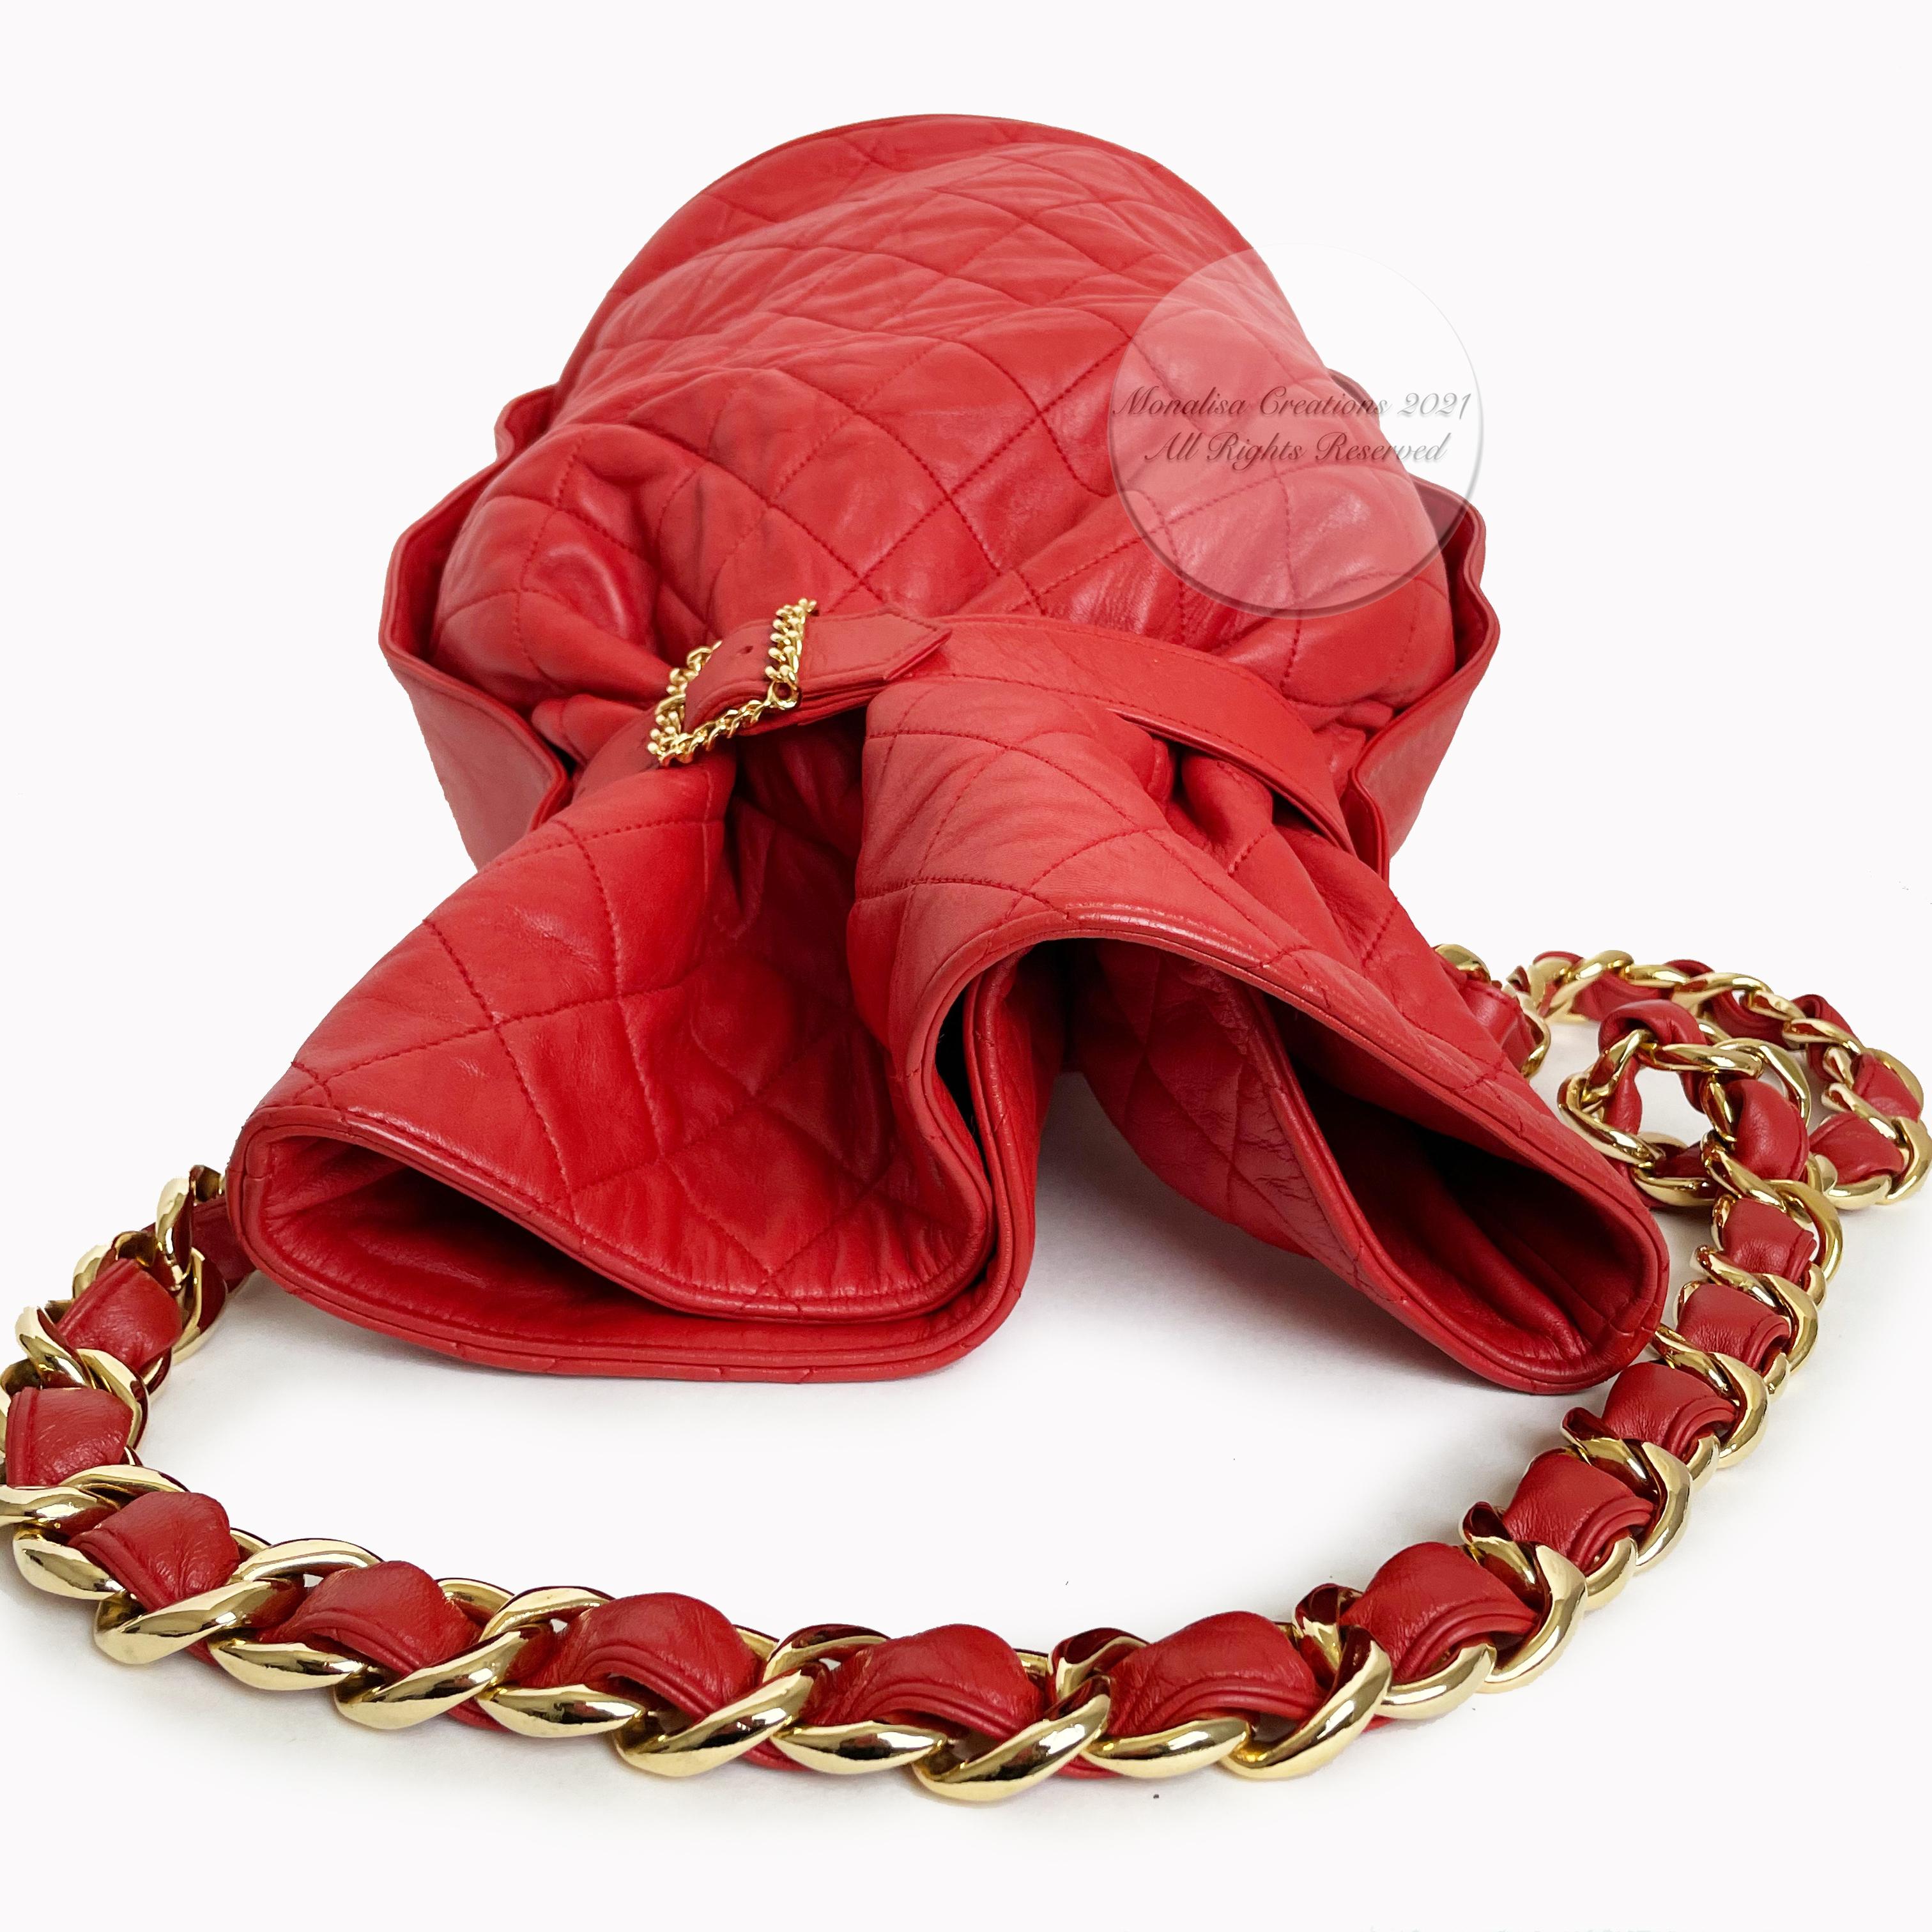 Vintage Chanel Buckle Bag Red Matelasse Leather with Chain Strap F/W 1992 Rare For Sale 4